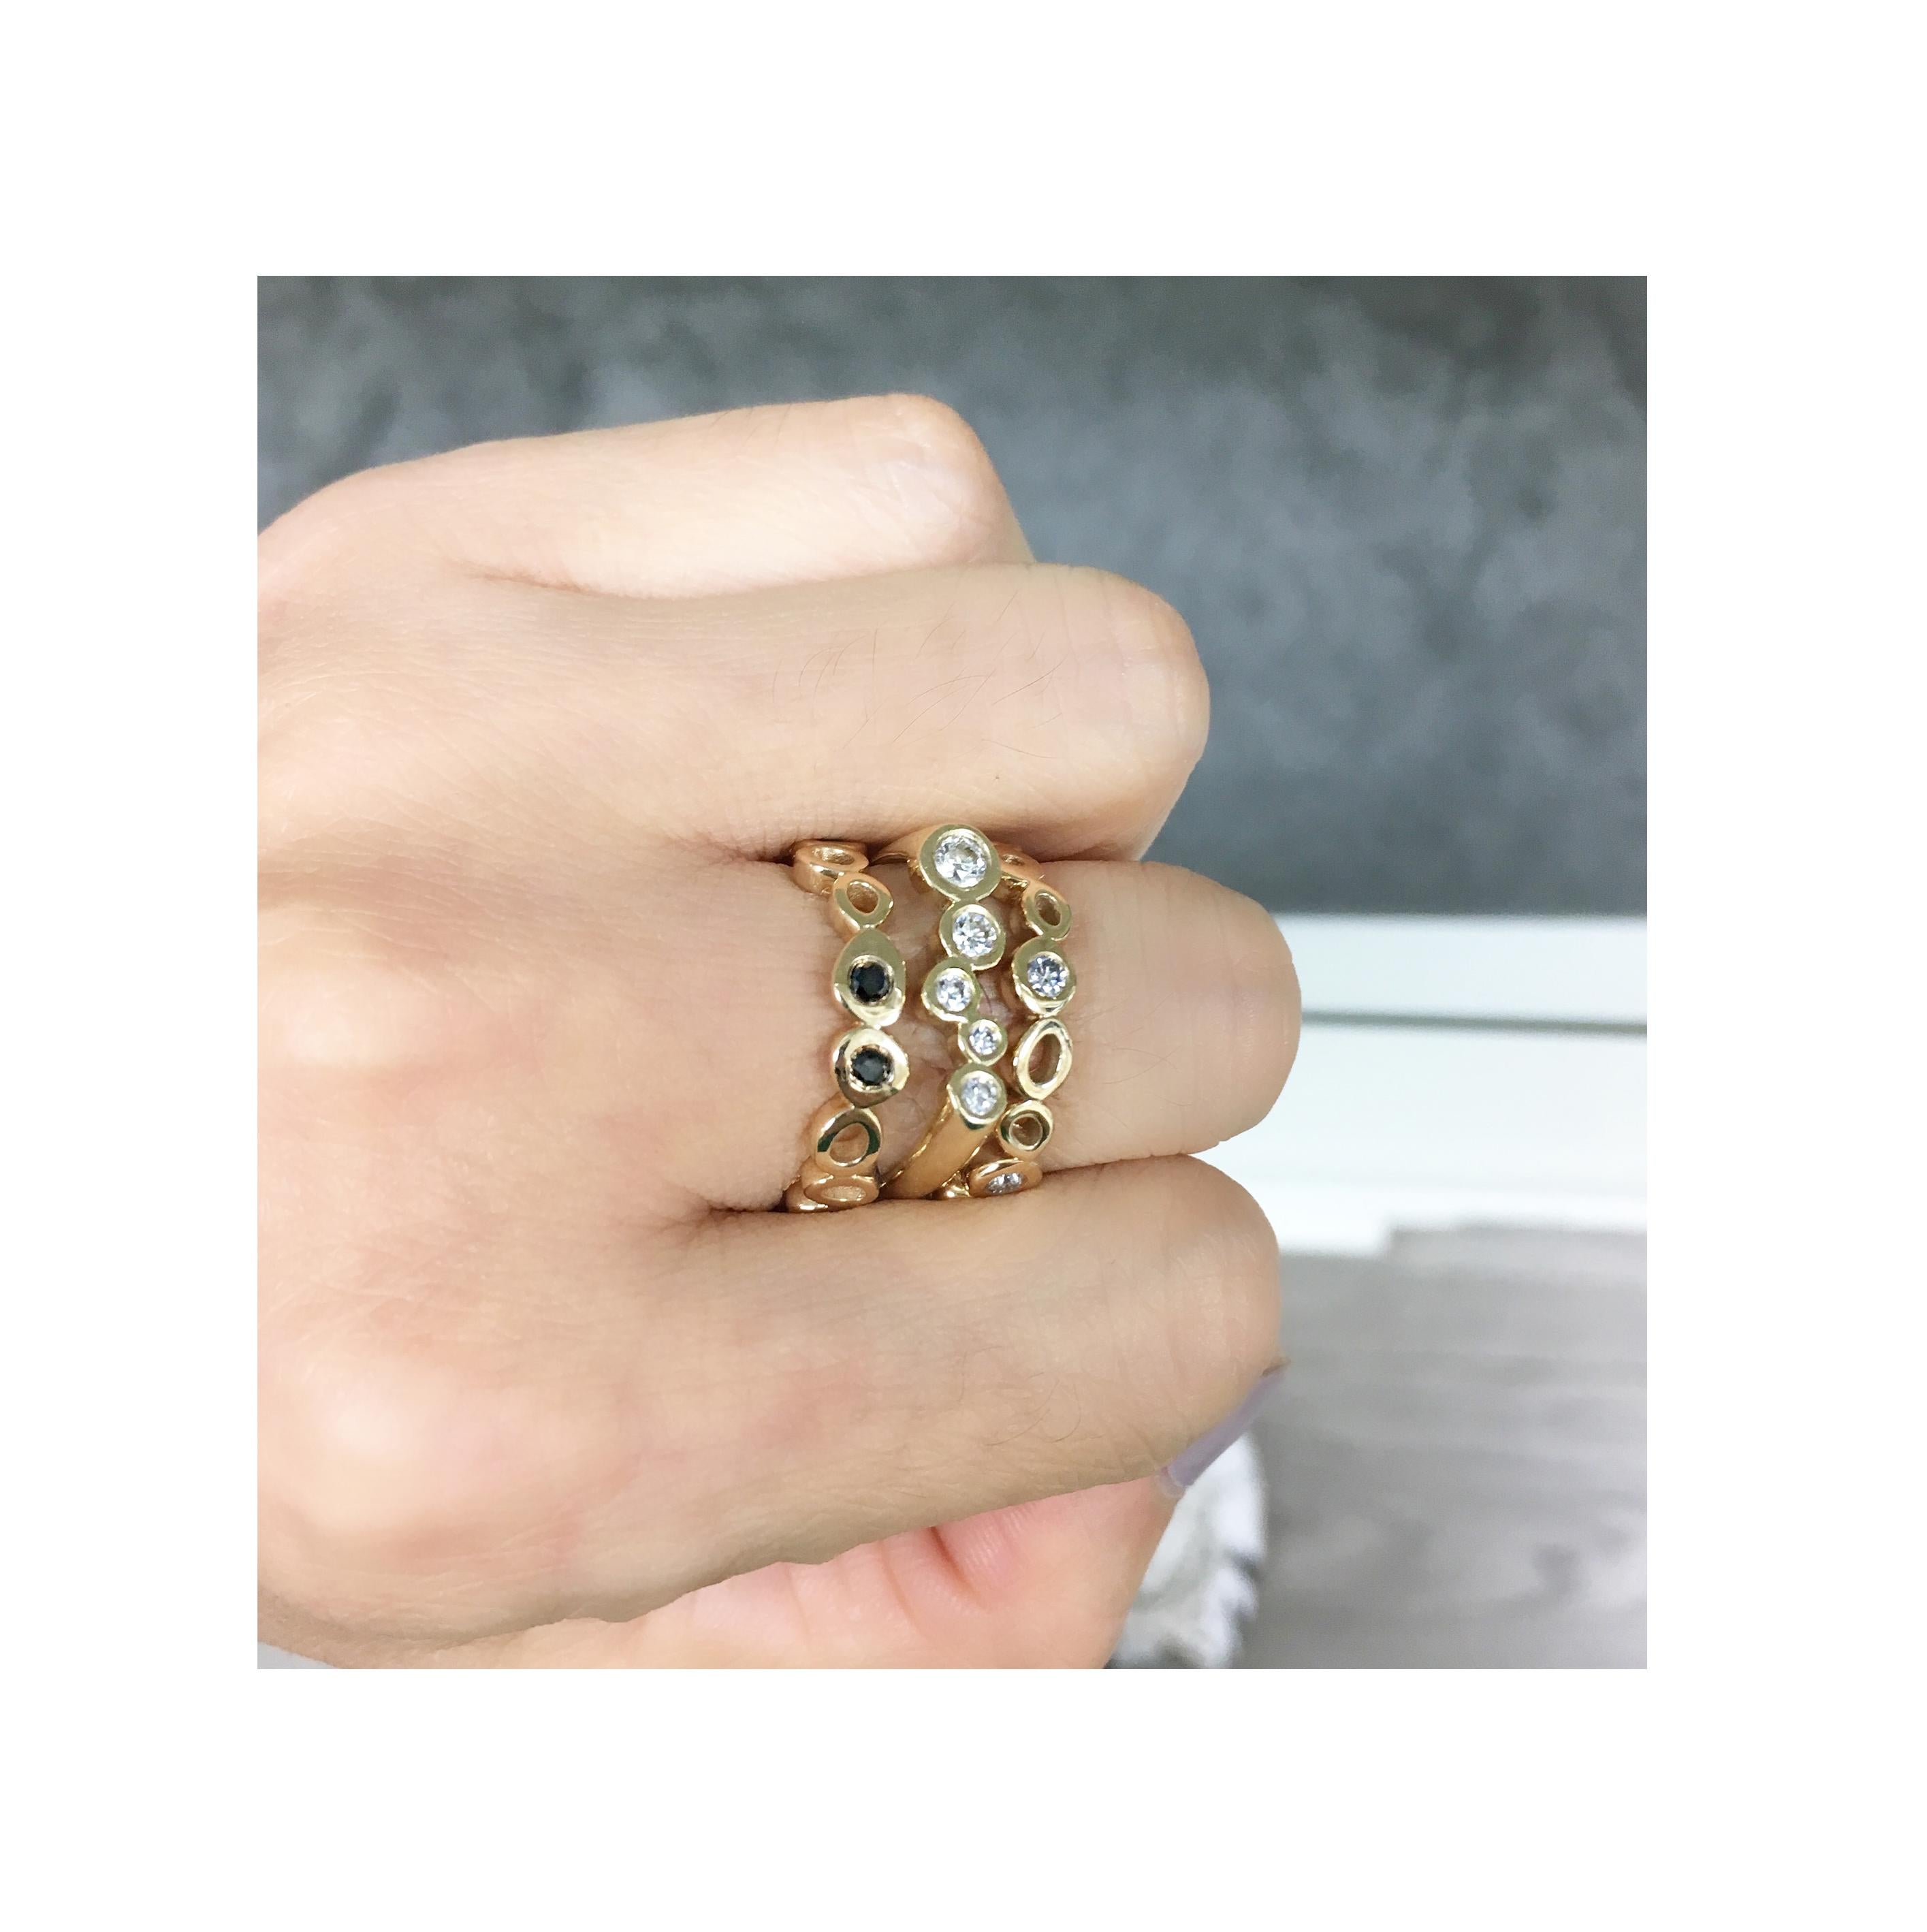 The perfect combination of comfort and diamond bling on your fingers.
Diamonds sprinkled across your fingers just like our Shadows earrings and bar pendant.
The sides of the ring bands are also tapered for a comfortable fit. 
Also makes a great